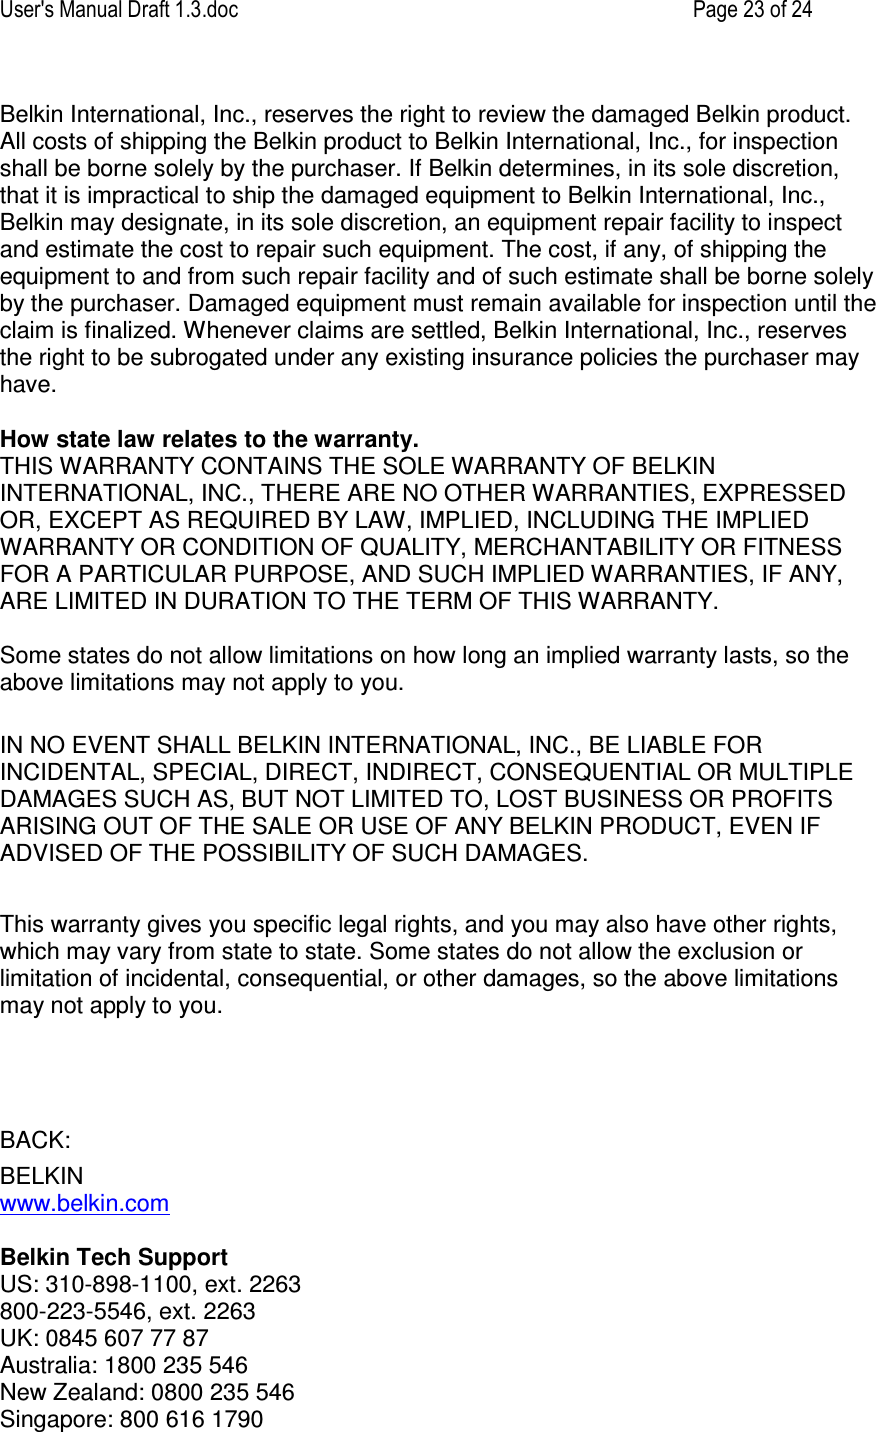 User&apos;s Manual Draft 1.3.doc    Page 23 of 24 Belkin International, Inc., reserves the right to review the damaged Belkin product. All costs of shipping the Belkin product to Belkin International, Inc., for inspection shall be borne solely by the purchaser. If Belkin determines, in its sole discretion, that it is impractical to ship the damaged equipment to Belkin International, Inc., Belkin may designate, in its sole discretion, an equipment repair facility to inspect and estimate the cost to repair such equipment. The cost, if any, of shipping the equipment to and from such repair facility and of such estimate shall be borne solely by the purchaser. Damaged equipment must remain available for inspection until the claim is finalized. Whenever claims are settled, Belkin International, Inc., reserves the right to be subrogated under any existing insurance policies the purchaser may have.   How state law relates to the warranty. THIS WARRANTY CONTAINS THE SOLE WARRANTY OF BELKIN INTERNATIONAL, INC., THERE ARE NO OTHER WARRANTIES, EXPRESSED OR, EXCEPT AS REQUIRED BY LAW, IMPLIED, INCLUDING THE IMPLIED WARRANTY OR CONDITION OF QUALITY, MERCHANTABILITY OR FITNESS FOR A PARTICULAR PURPOSE, AND SUCH IMPLIED WARRANTIES, IF ANY, ARE LIMITED IN DURATION TO THE TERM OF THIS WARRANTY.   Some states do not allow limitations on how long an implied warranty lasts, so the above limitations may not apply to you.  IN NO EVENT SHALL BELKIN INTERNATIONAL, INC., BE LIABLE FOR INCIDENTAL, SPECIAL, DIRECT, INDIRECT, CONSEQUENTIAL OR MULTIPLE DAMAGES SUCH AS, BUT NOT LIMITED TO, LOST BUSINESS OR PROFITS ARISING OUT OF THE SALE OR USE OF ANY BELKIN PRODUCT, EVEN IF ADVISED OF THE POSSIBILITY OF SUCH DAMAGES.   This warranty gives you specific legal rights, and you may also have other rights, which may vary from state to state. Some states do not allow the exclusion or limitation of incidental, consequential, or other damages, so the above limitations may not apply to you.    BACK: BELKIN www.belkin.com  Belkin Tech Support US: 310-898-1100, ext. 2263 800-223-5546, ext. 2263 UK: 0845 607 77 87 Australia: 1800 235 546 New Zealand: 0800 235 546 Singapore: 800 616 1790 